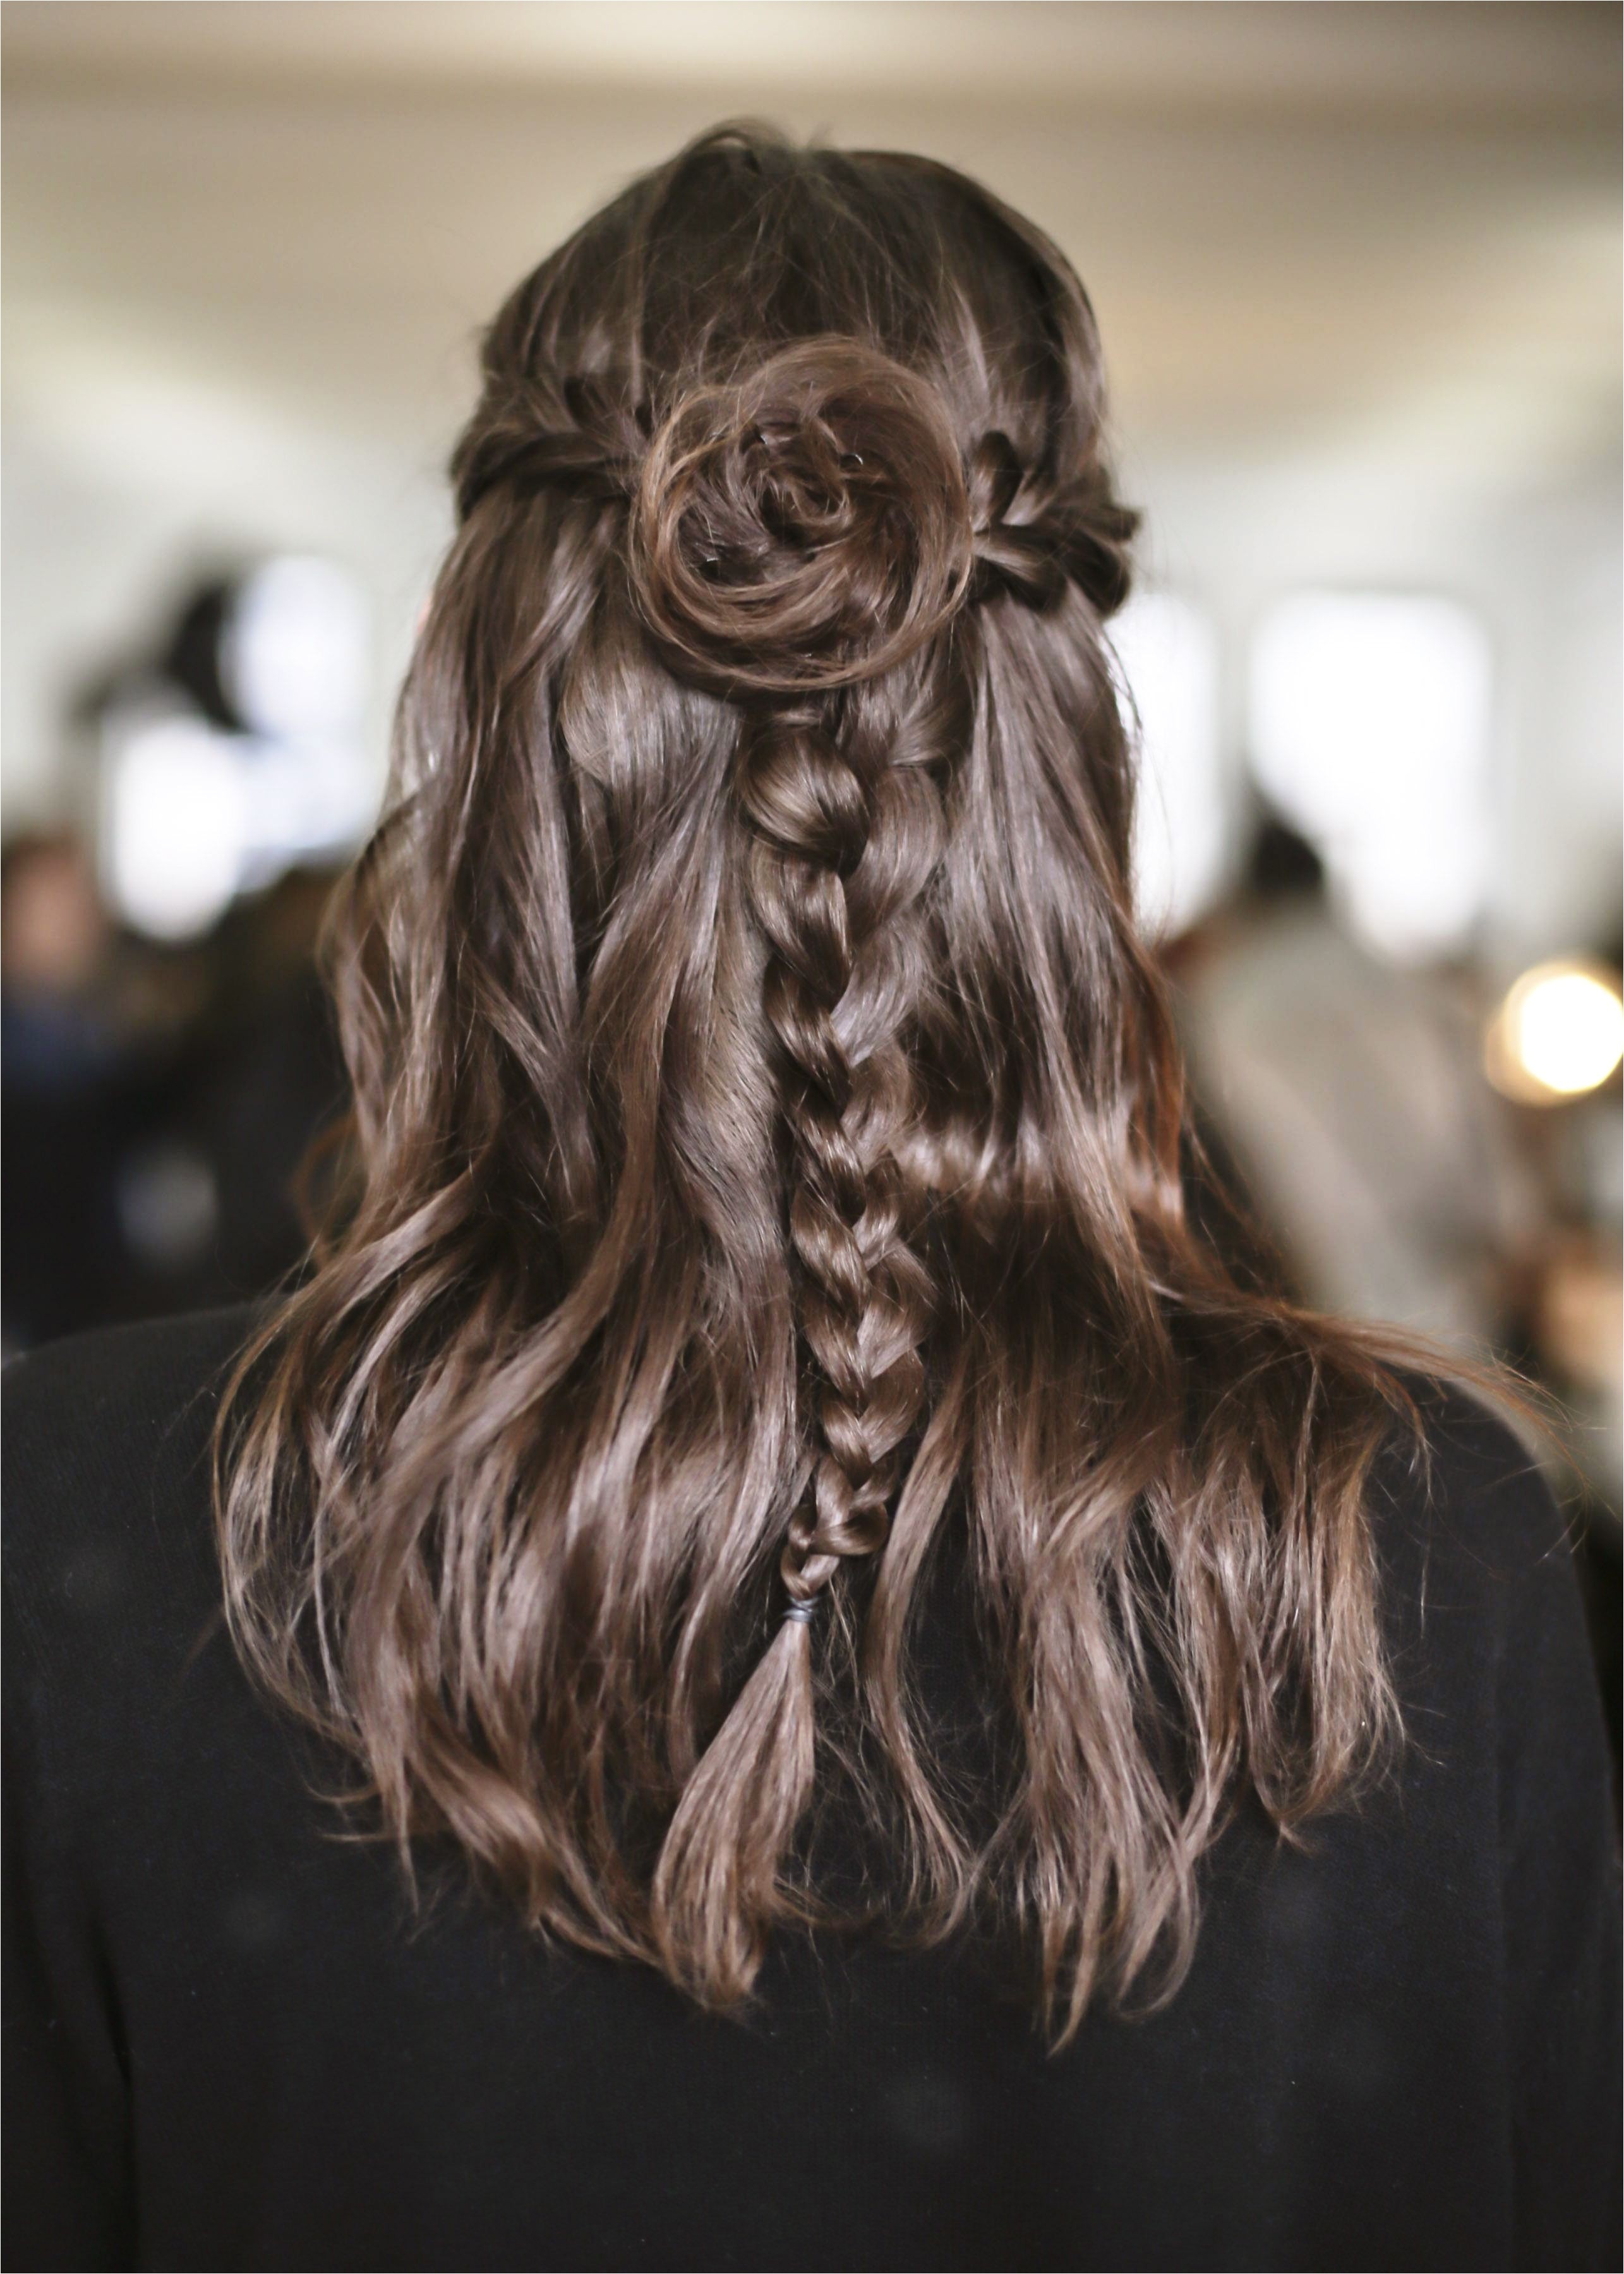 These twists and braids are the perfect summer hairstyle e all the looks now